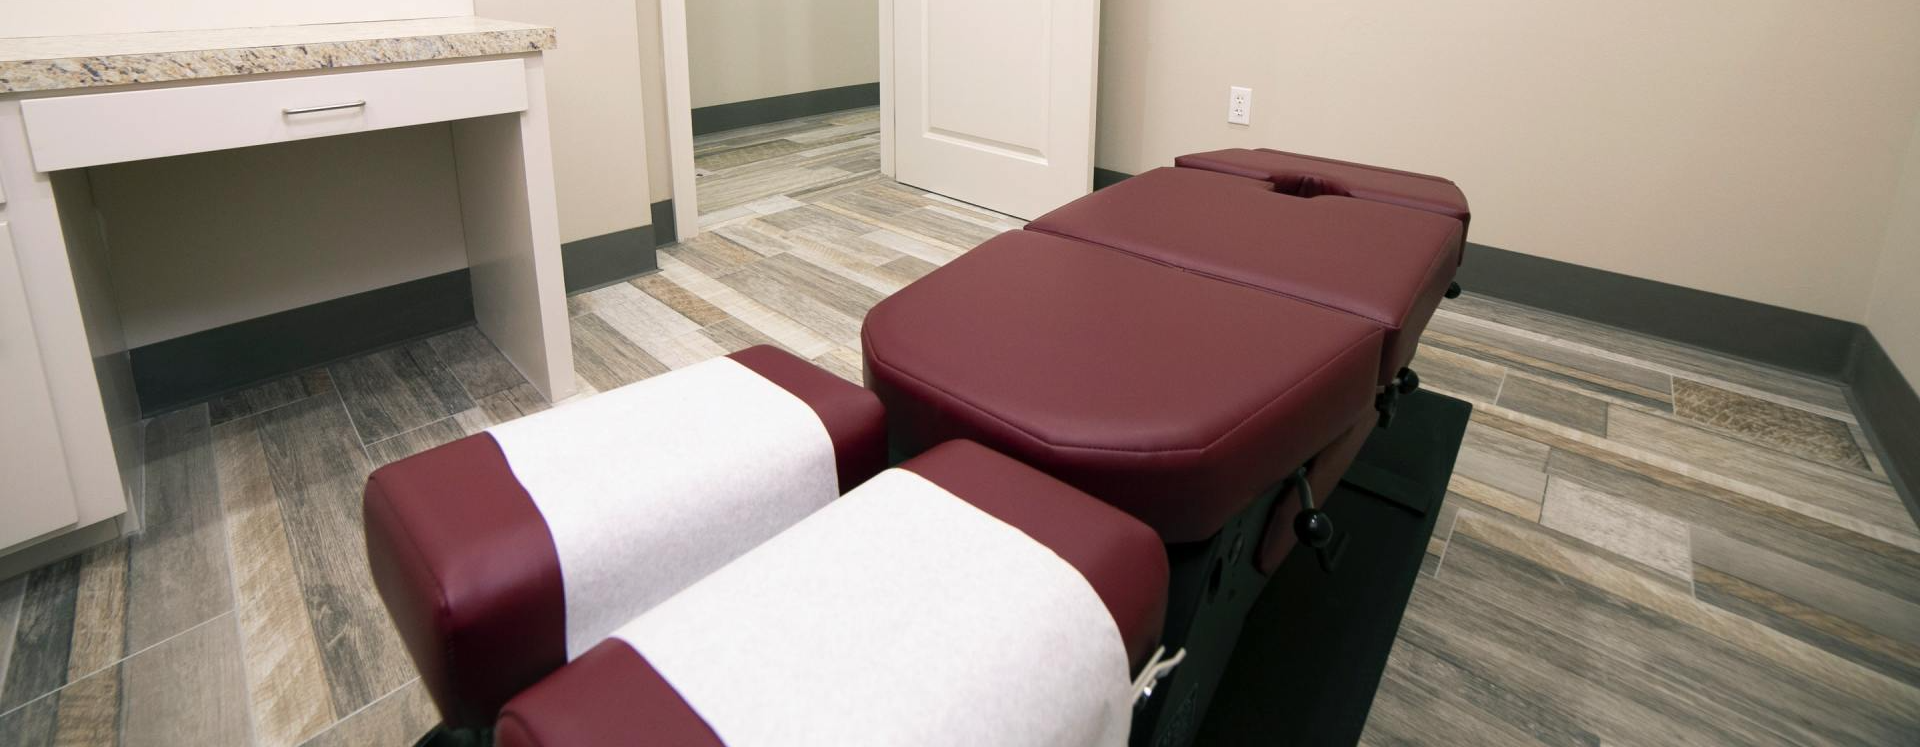 medical equipment upholstery, Orchard Park, NY